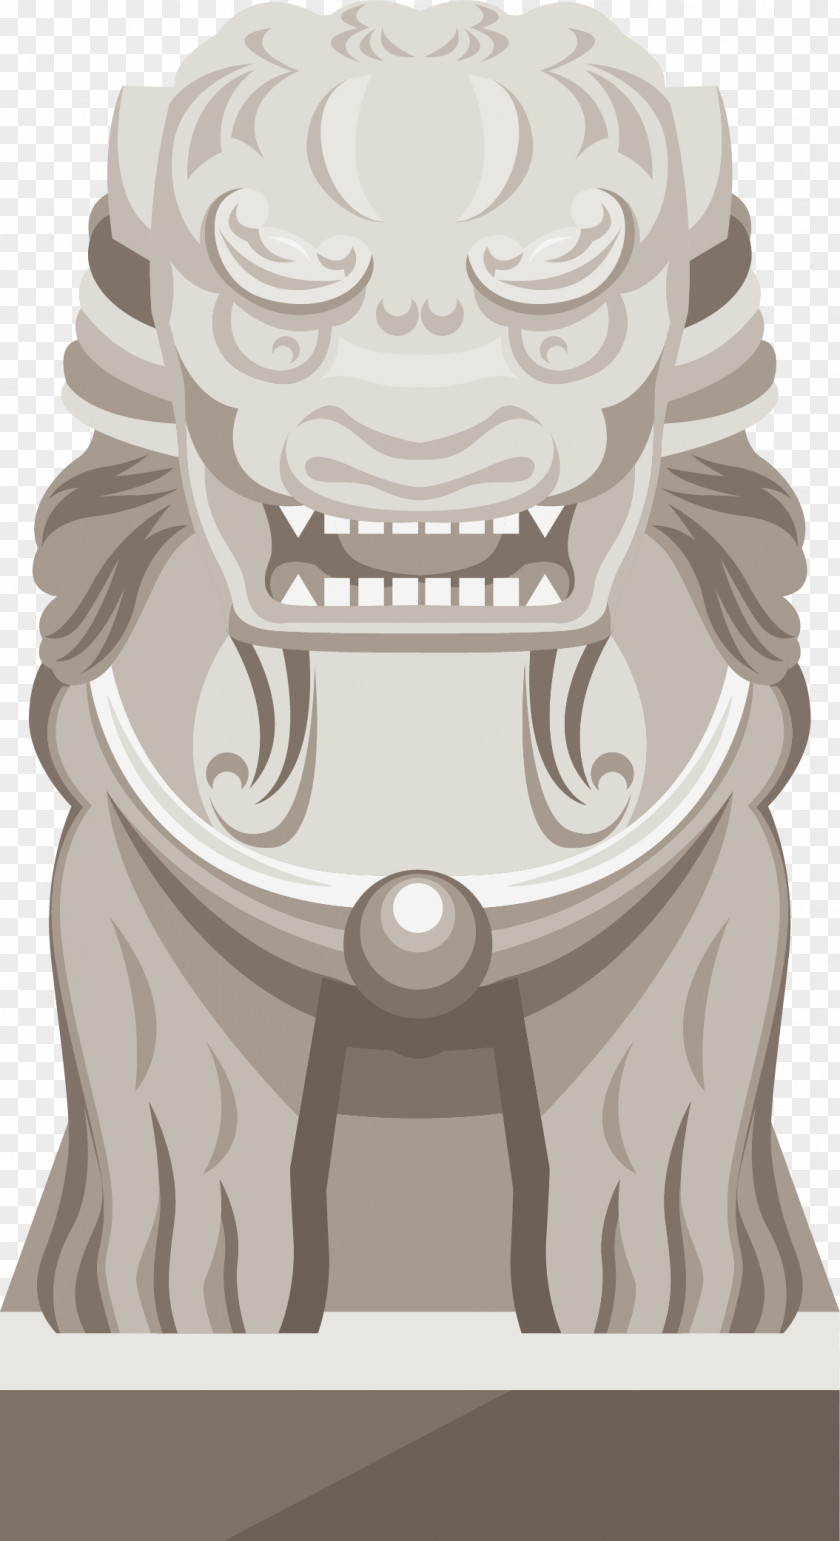 Vector Hand-painted Lion Download PNG